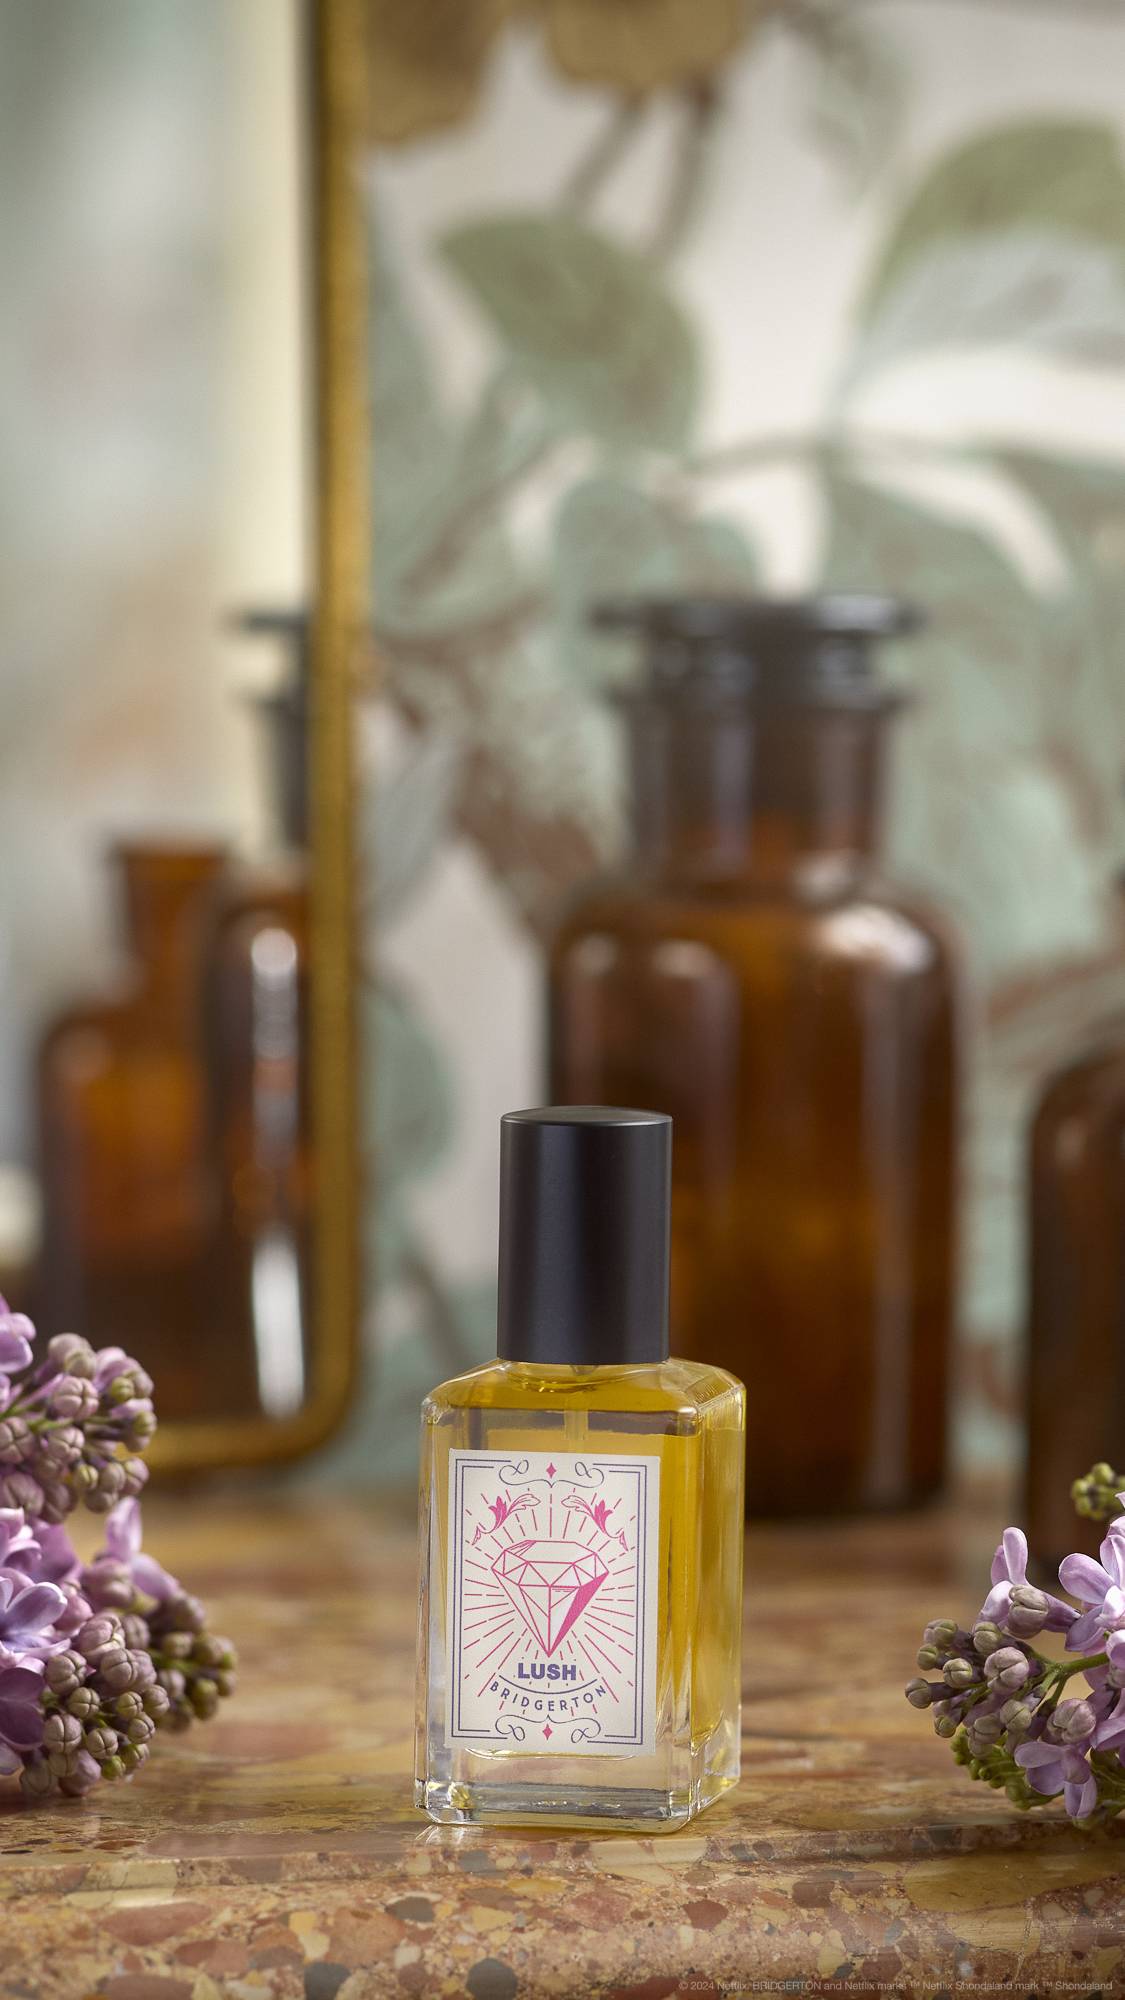 An out-of-focus background of leaves and what appears to be a dressing table. The focus is the LUSH | Bridgerton perfume bottle placed on a marbled counter with flowers on either side.